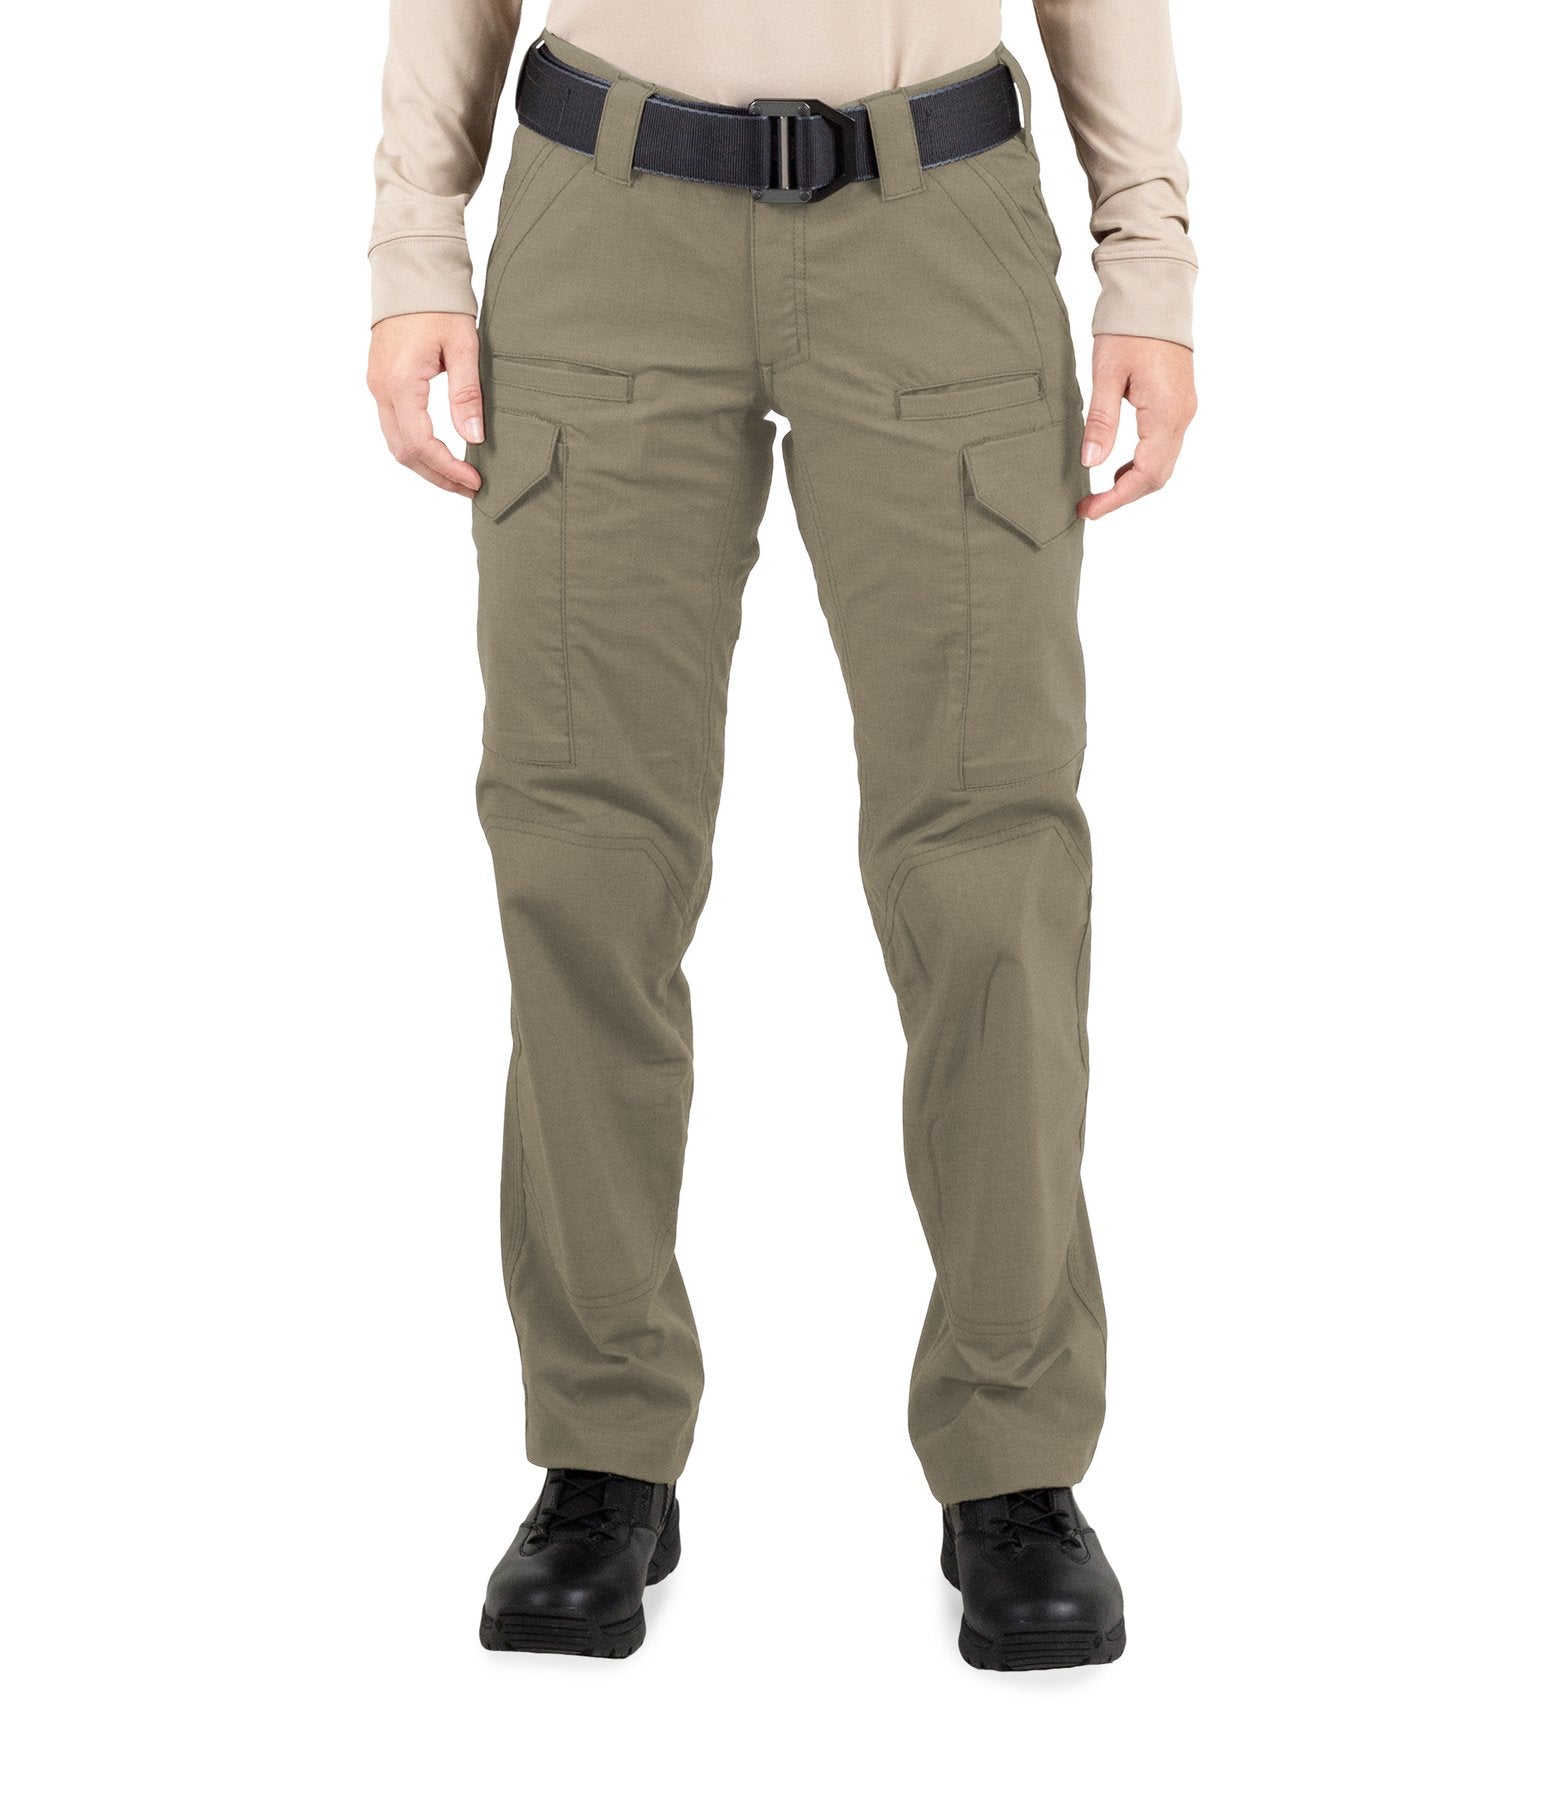 First Tactical V2 Tactical Pants - Women's